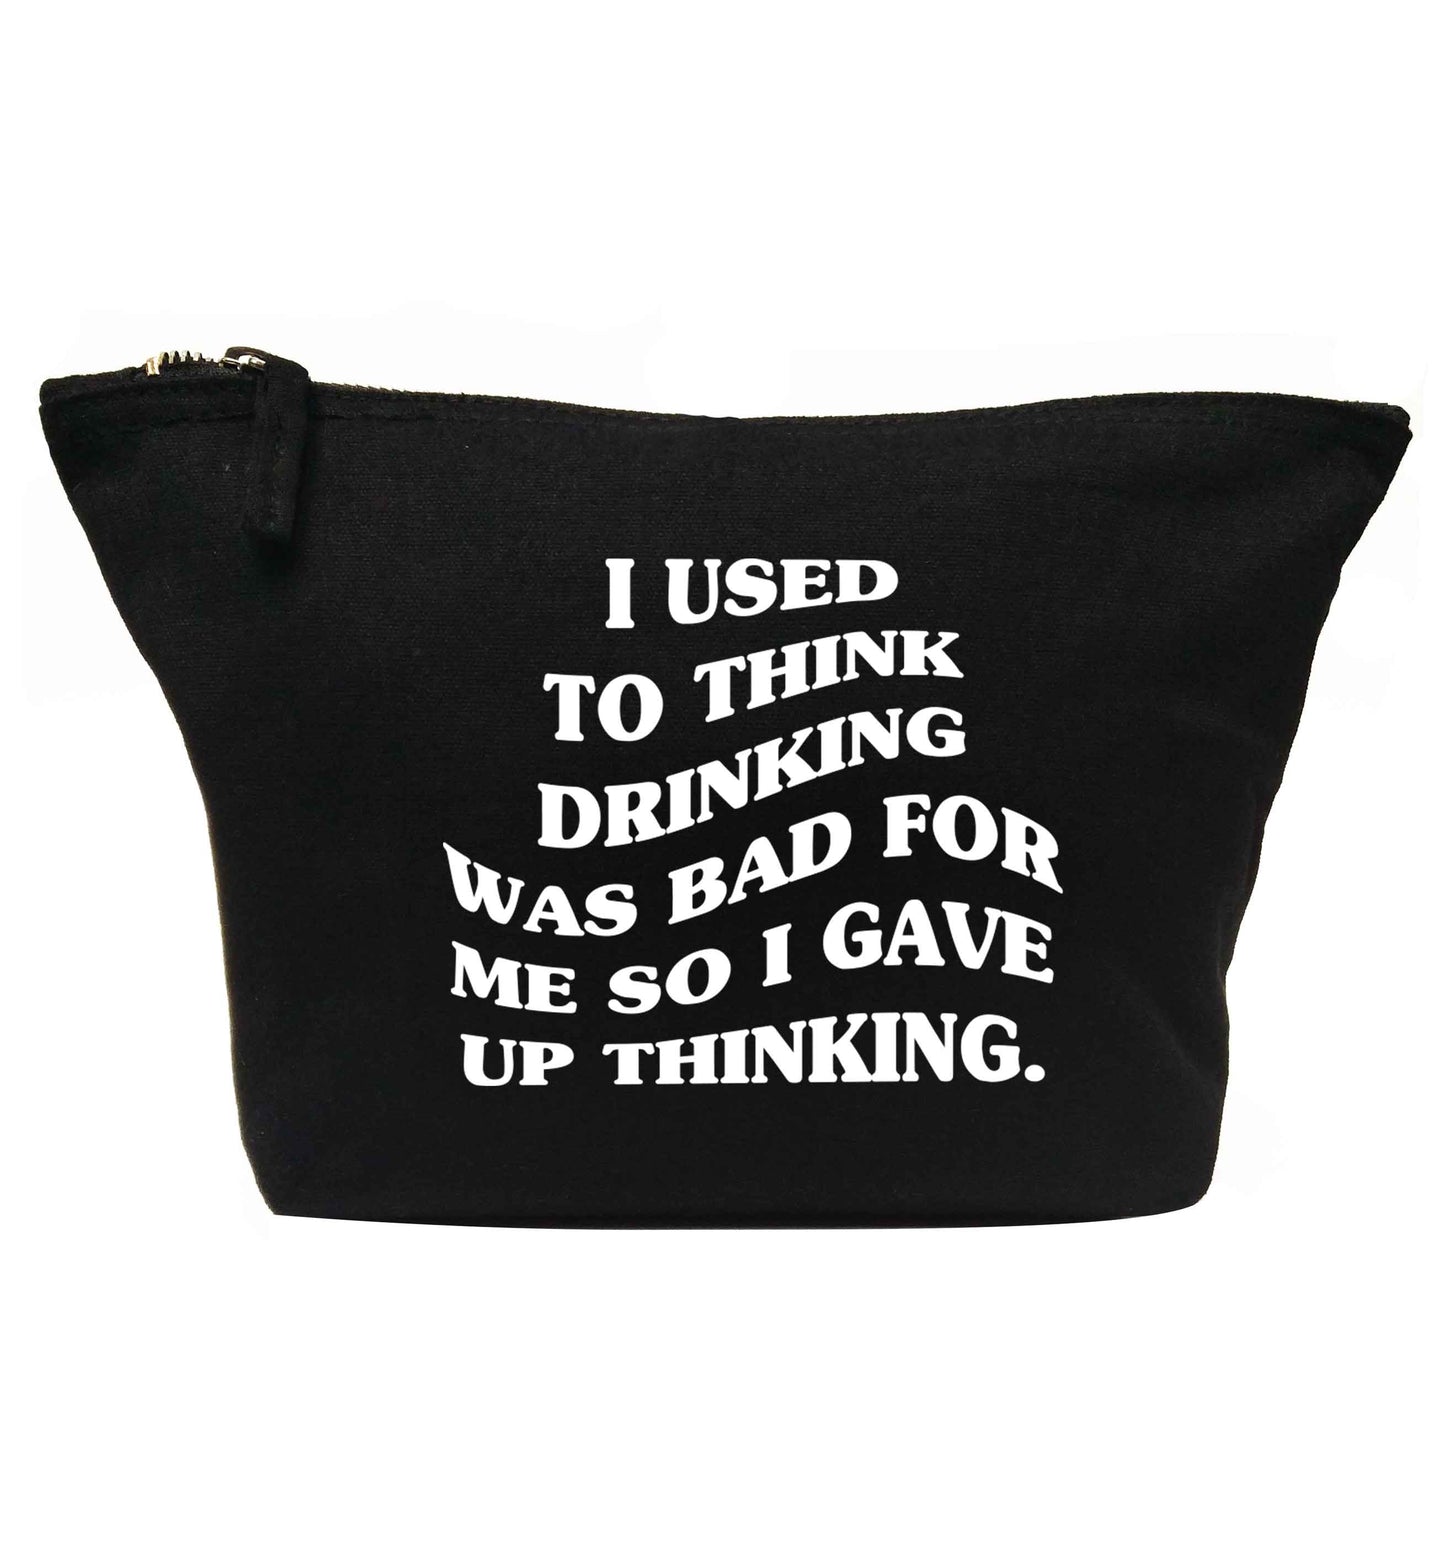 I used to think drinking was bad so I gave up thinking | makeup / wash bag